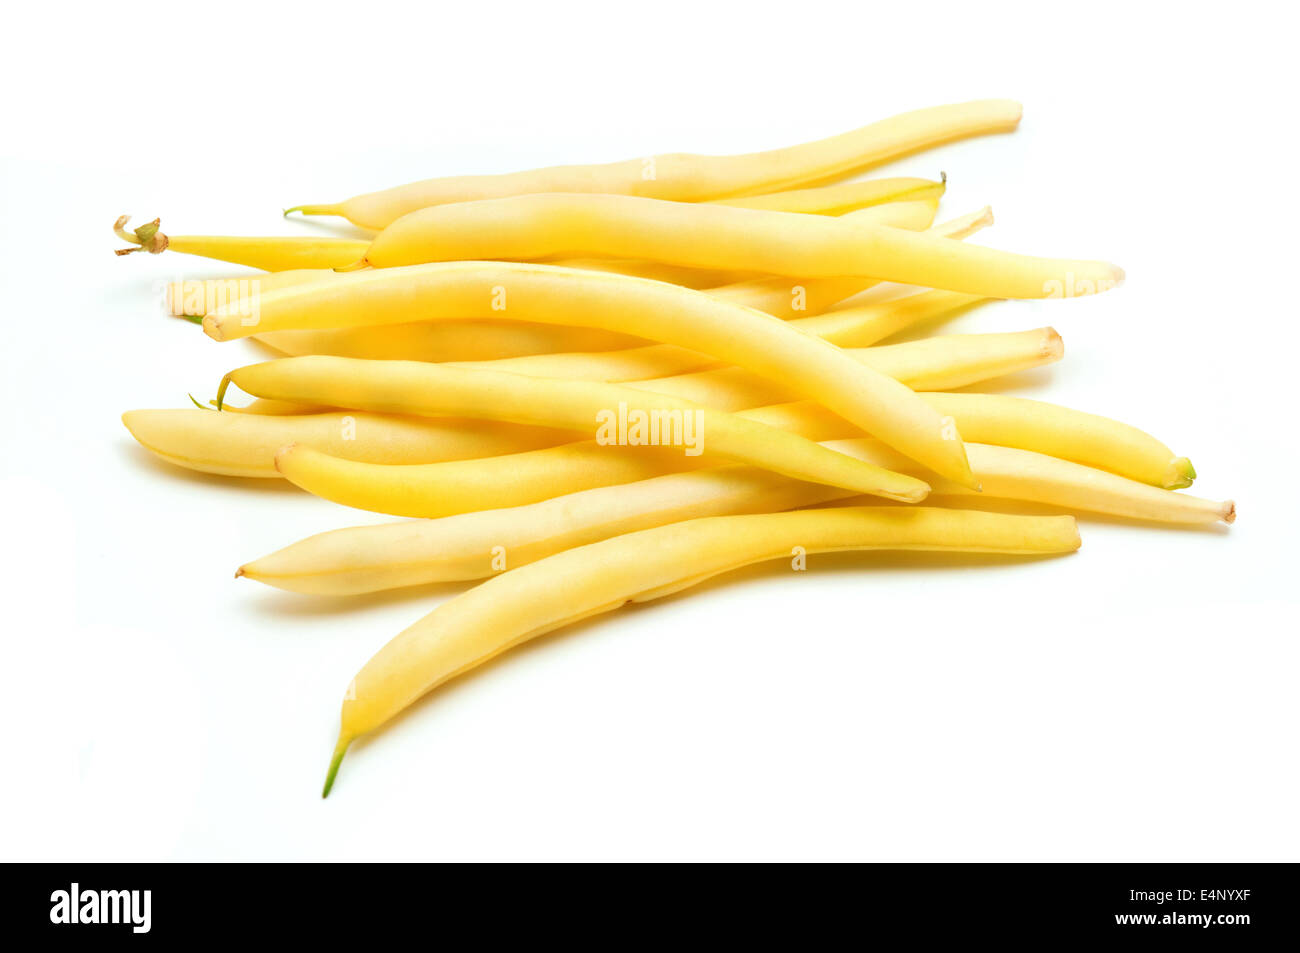 Wax beans on a white background Stock Photo